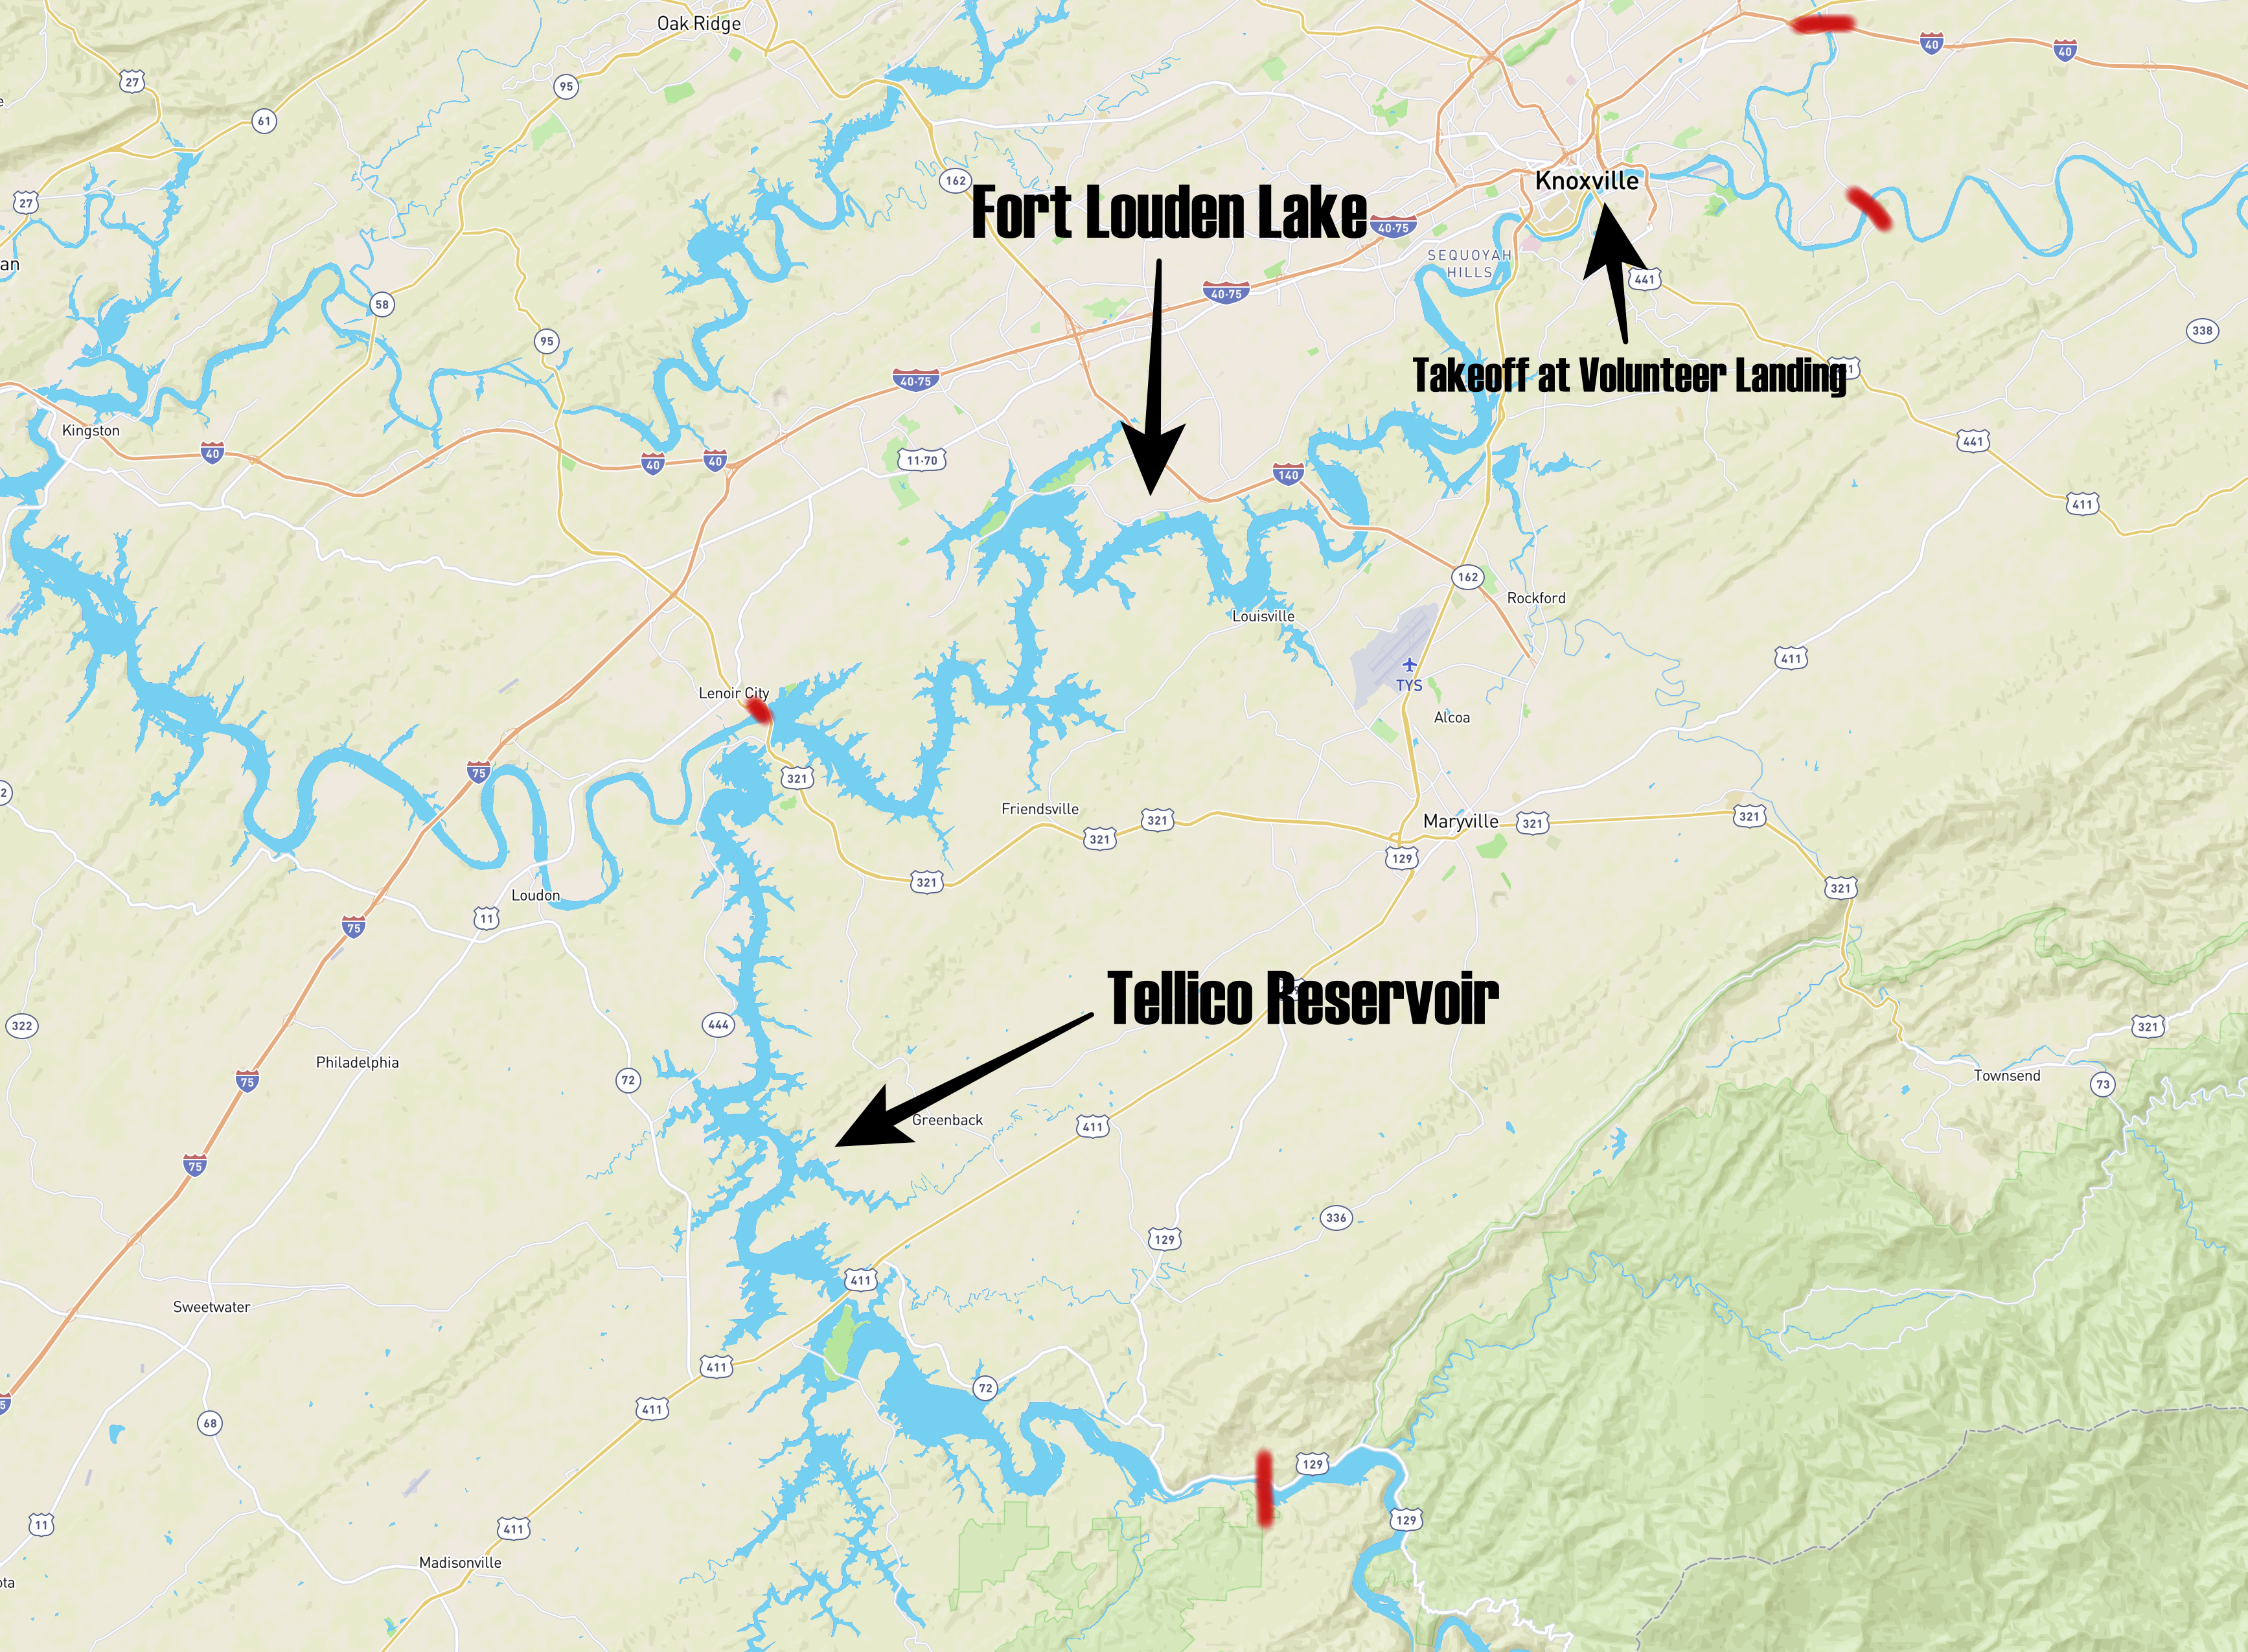 Tournament waters include Fort Loudoun and Tellico lakes, twin reservoirs connected by a canal and comprising about 30,000 acres. Competitors can fish either lake and anywhere along the Tennessee River upstream from Fort Loudoun Dam to the Interstate 40 bridge on the Holston River and the Highway 168 bridge on the French Broad River.